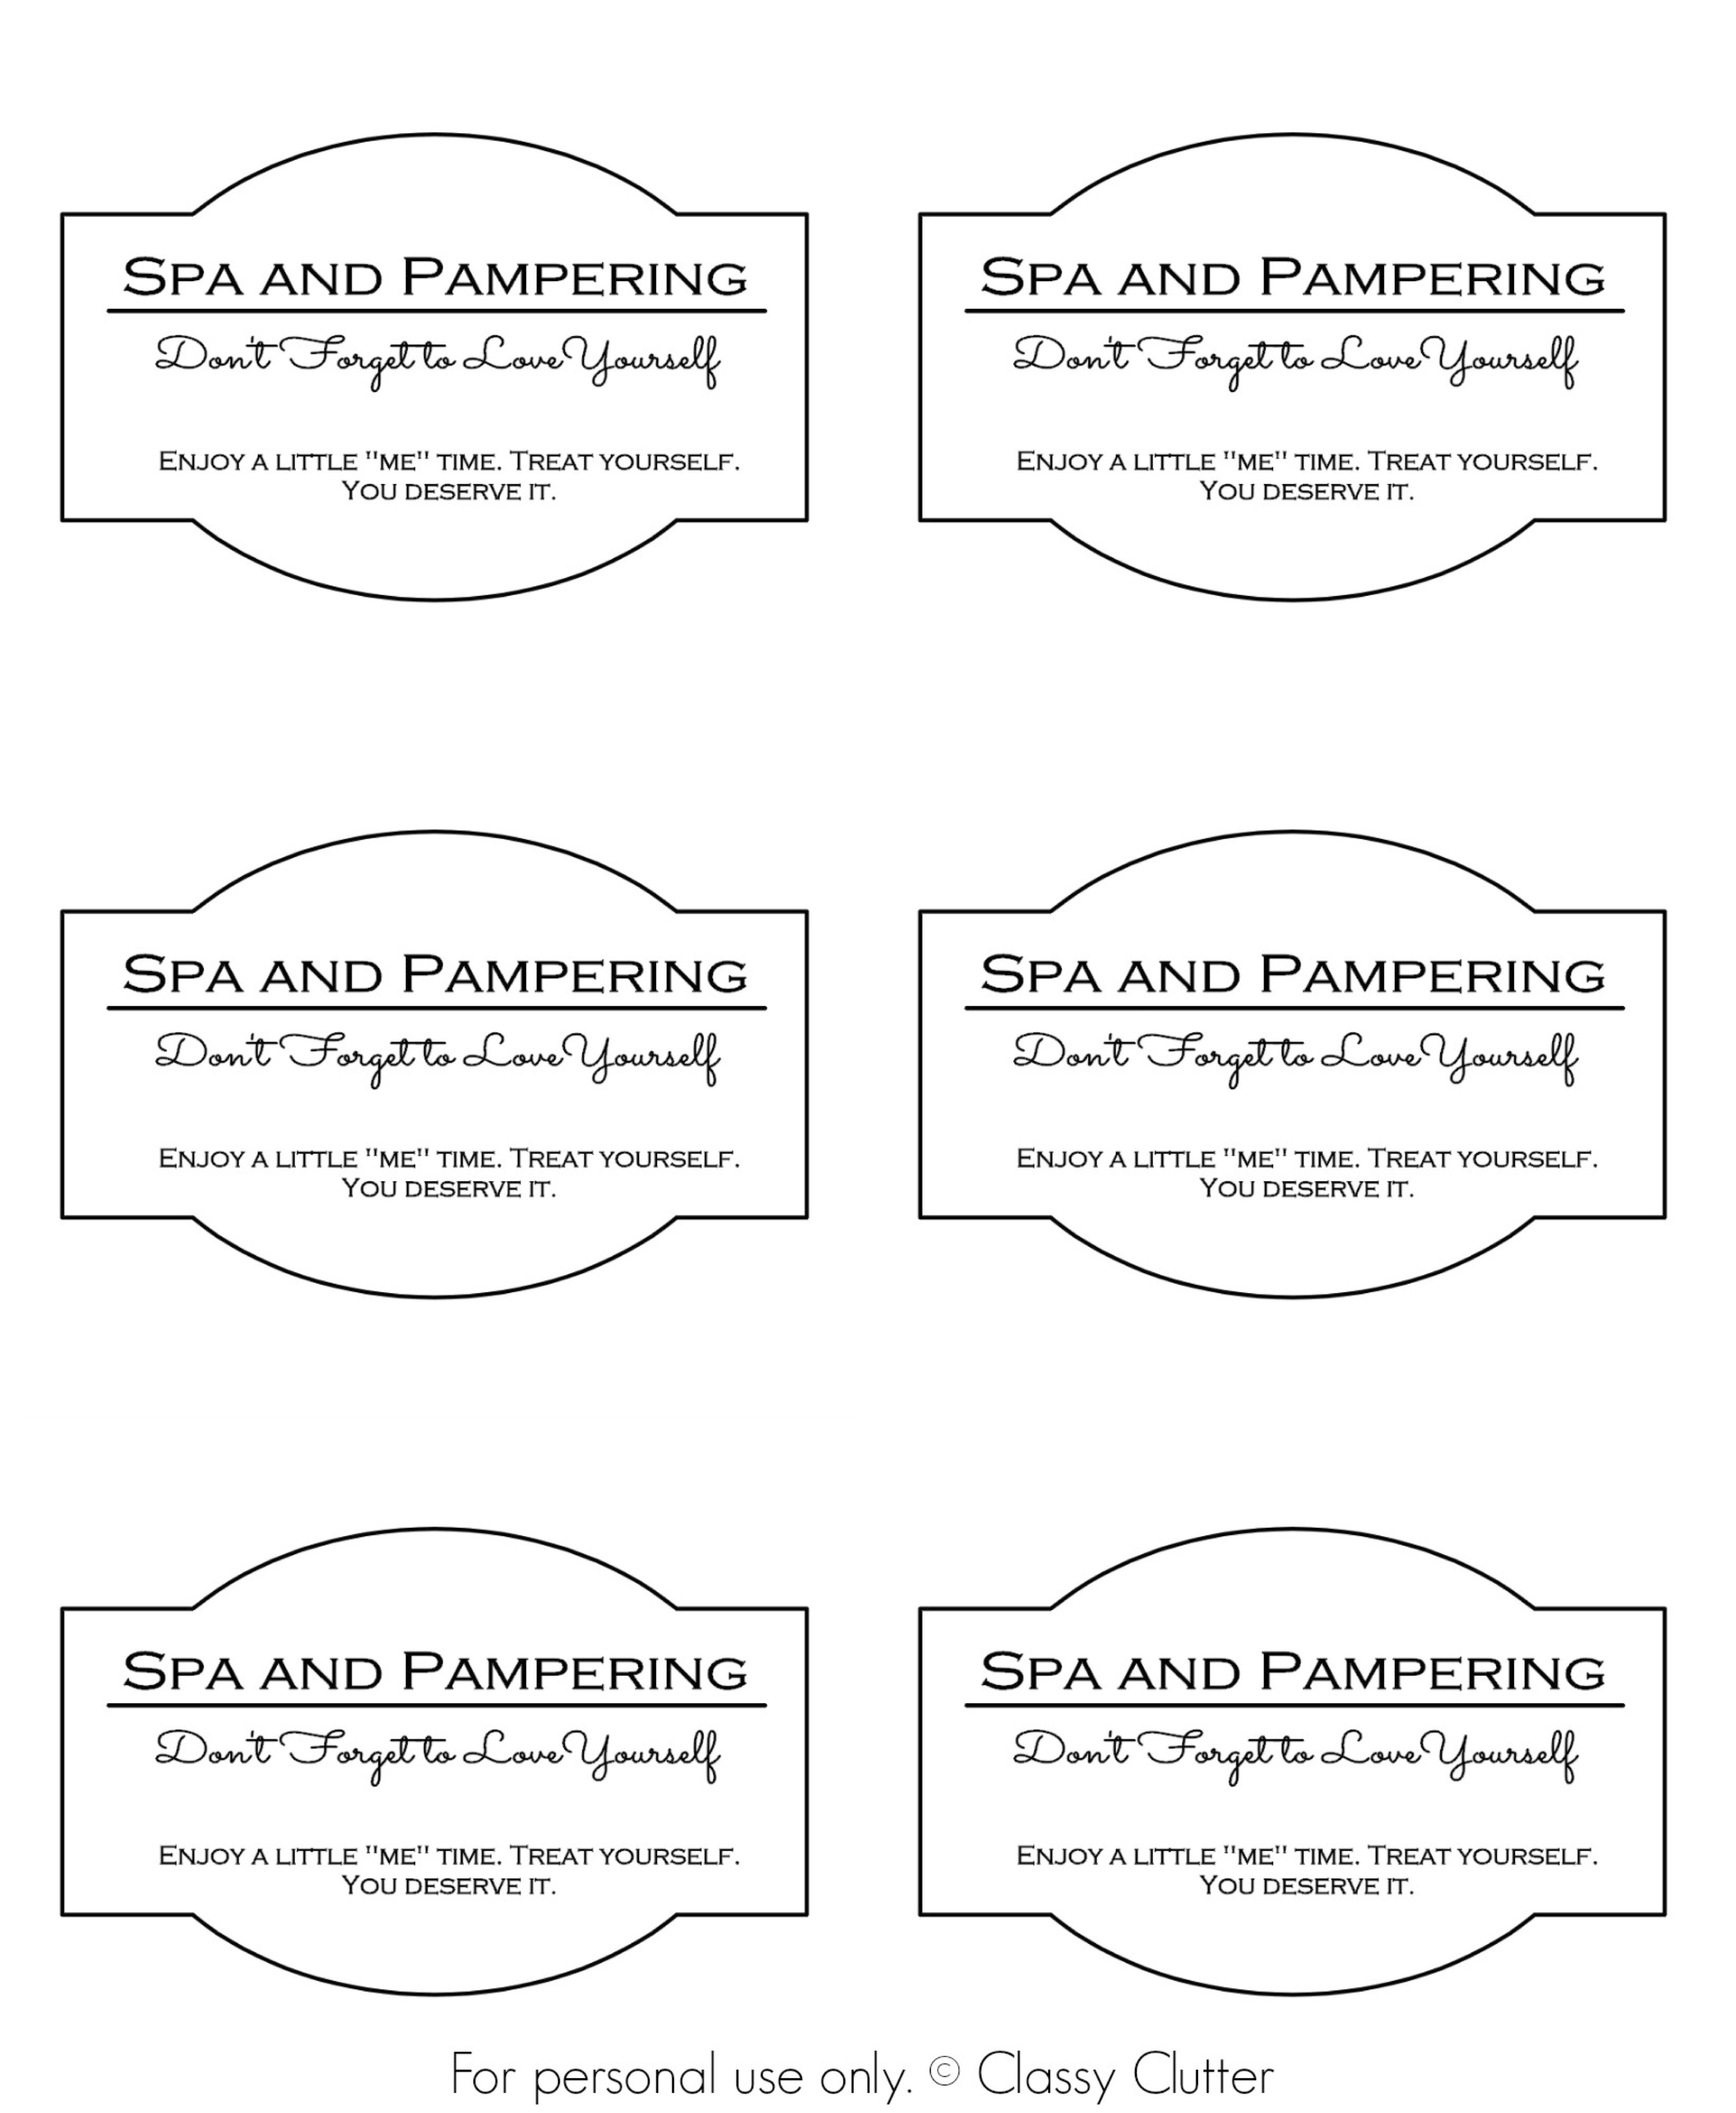 Spa And Pampering In A Jar - Classy Clutter - Spa In A Jar Free Printable Labels